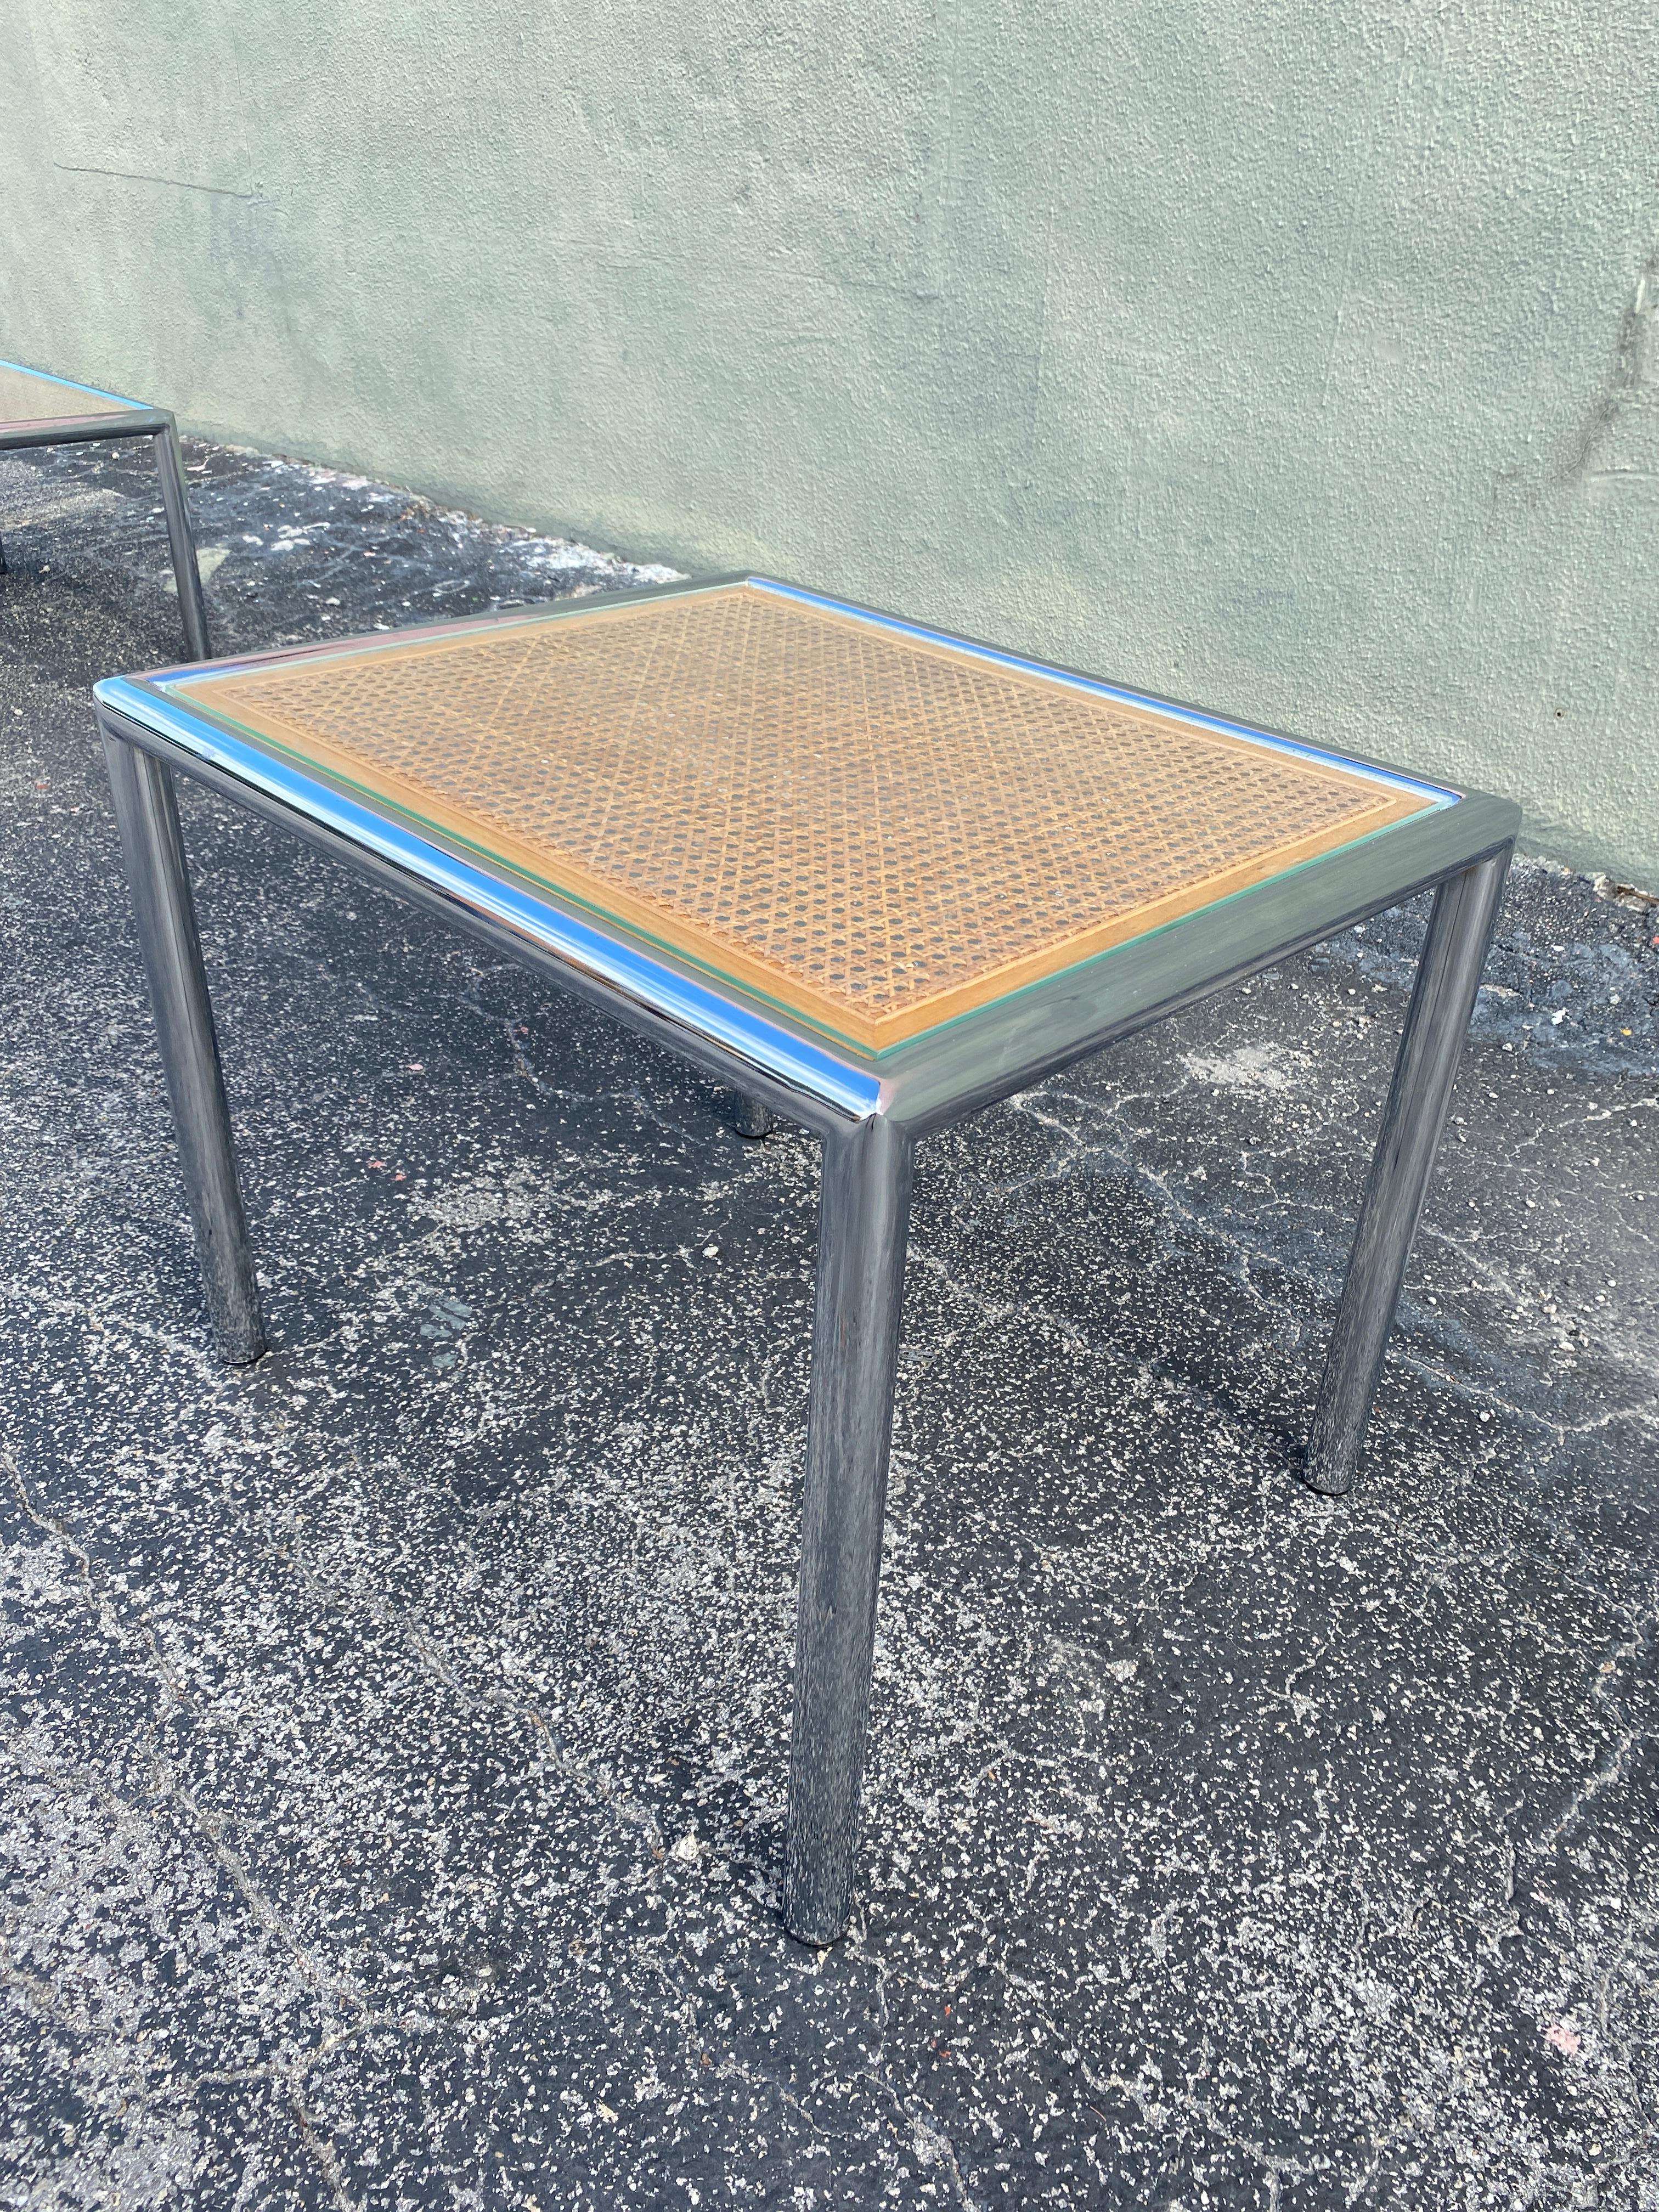 Vintage Milo Baughman chrome and cane coffee and side tables. Each table has a different measurement.

Cane in great condition with no holes, one of the tops is slightly darker than the others, are lightweight. Chrome has minor scratches.

Prices